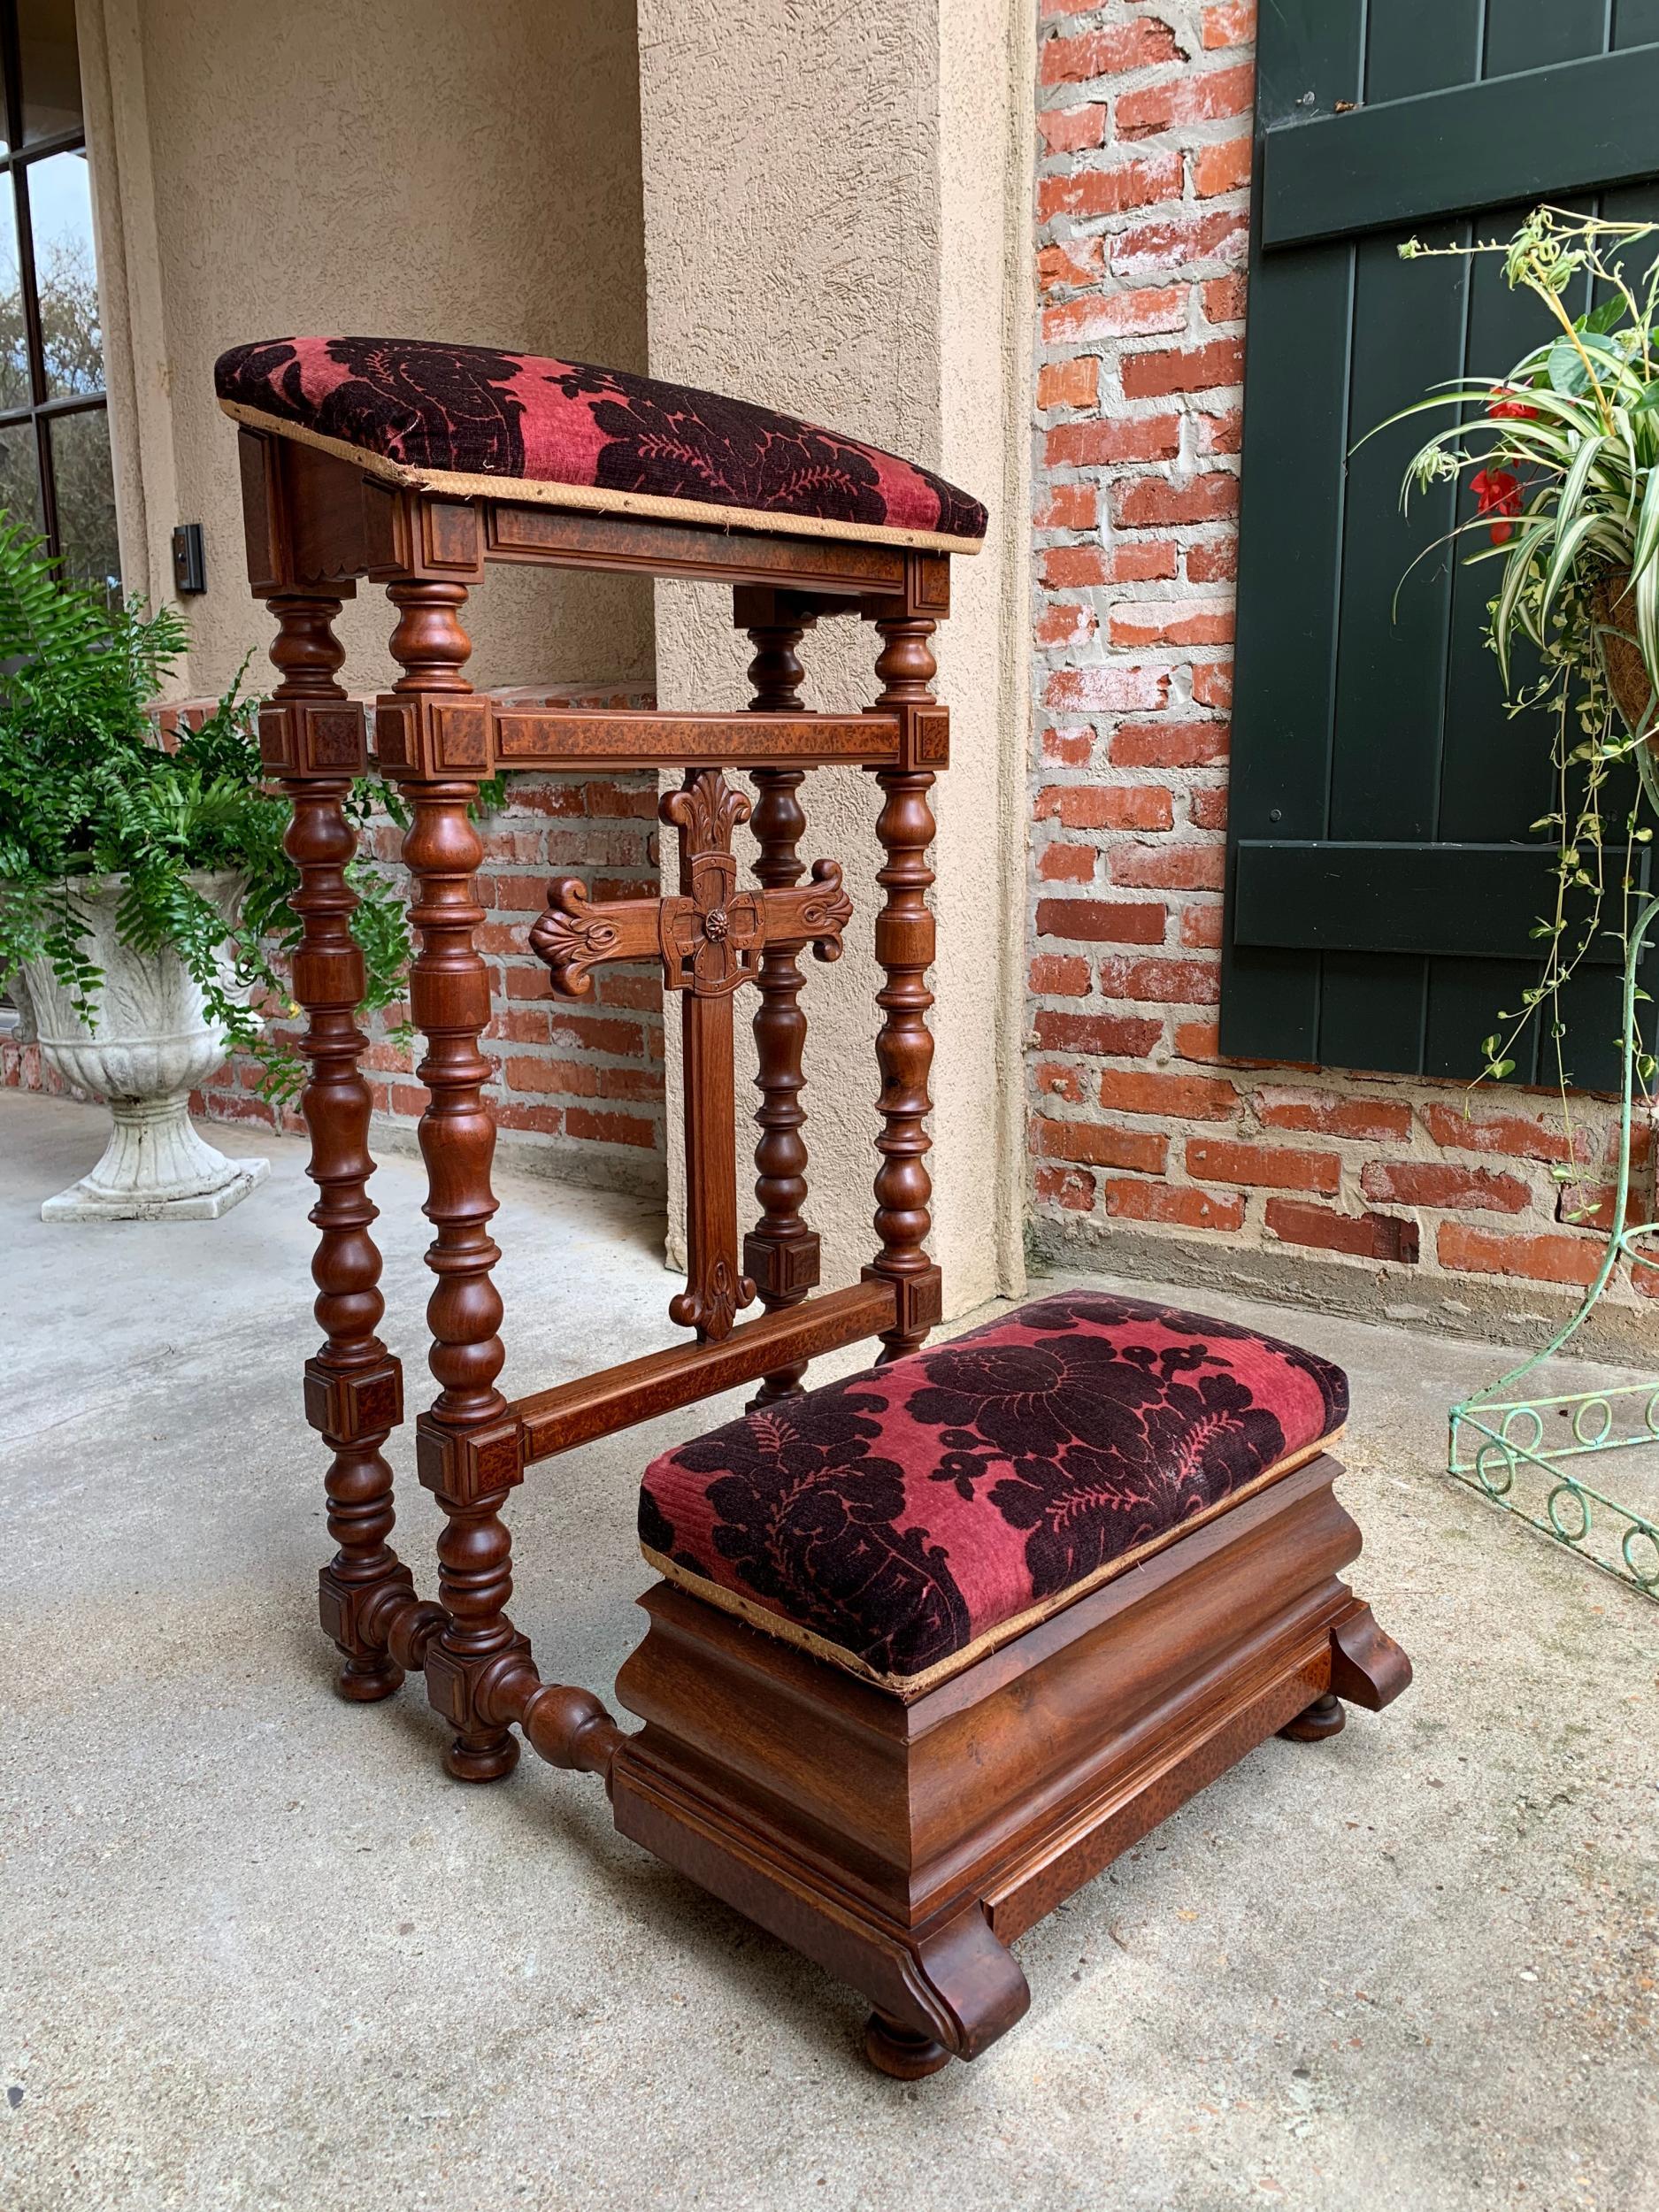 Antique French walnut Prayer Kneeler Prie Dieu Catholic Chapel bench

~Direct from France~
~This large “prie dieu” or kneeler was one of several unique liturgical items in our most recent European container~
~Each side features dual turned post